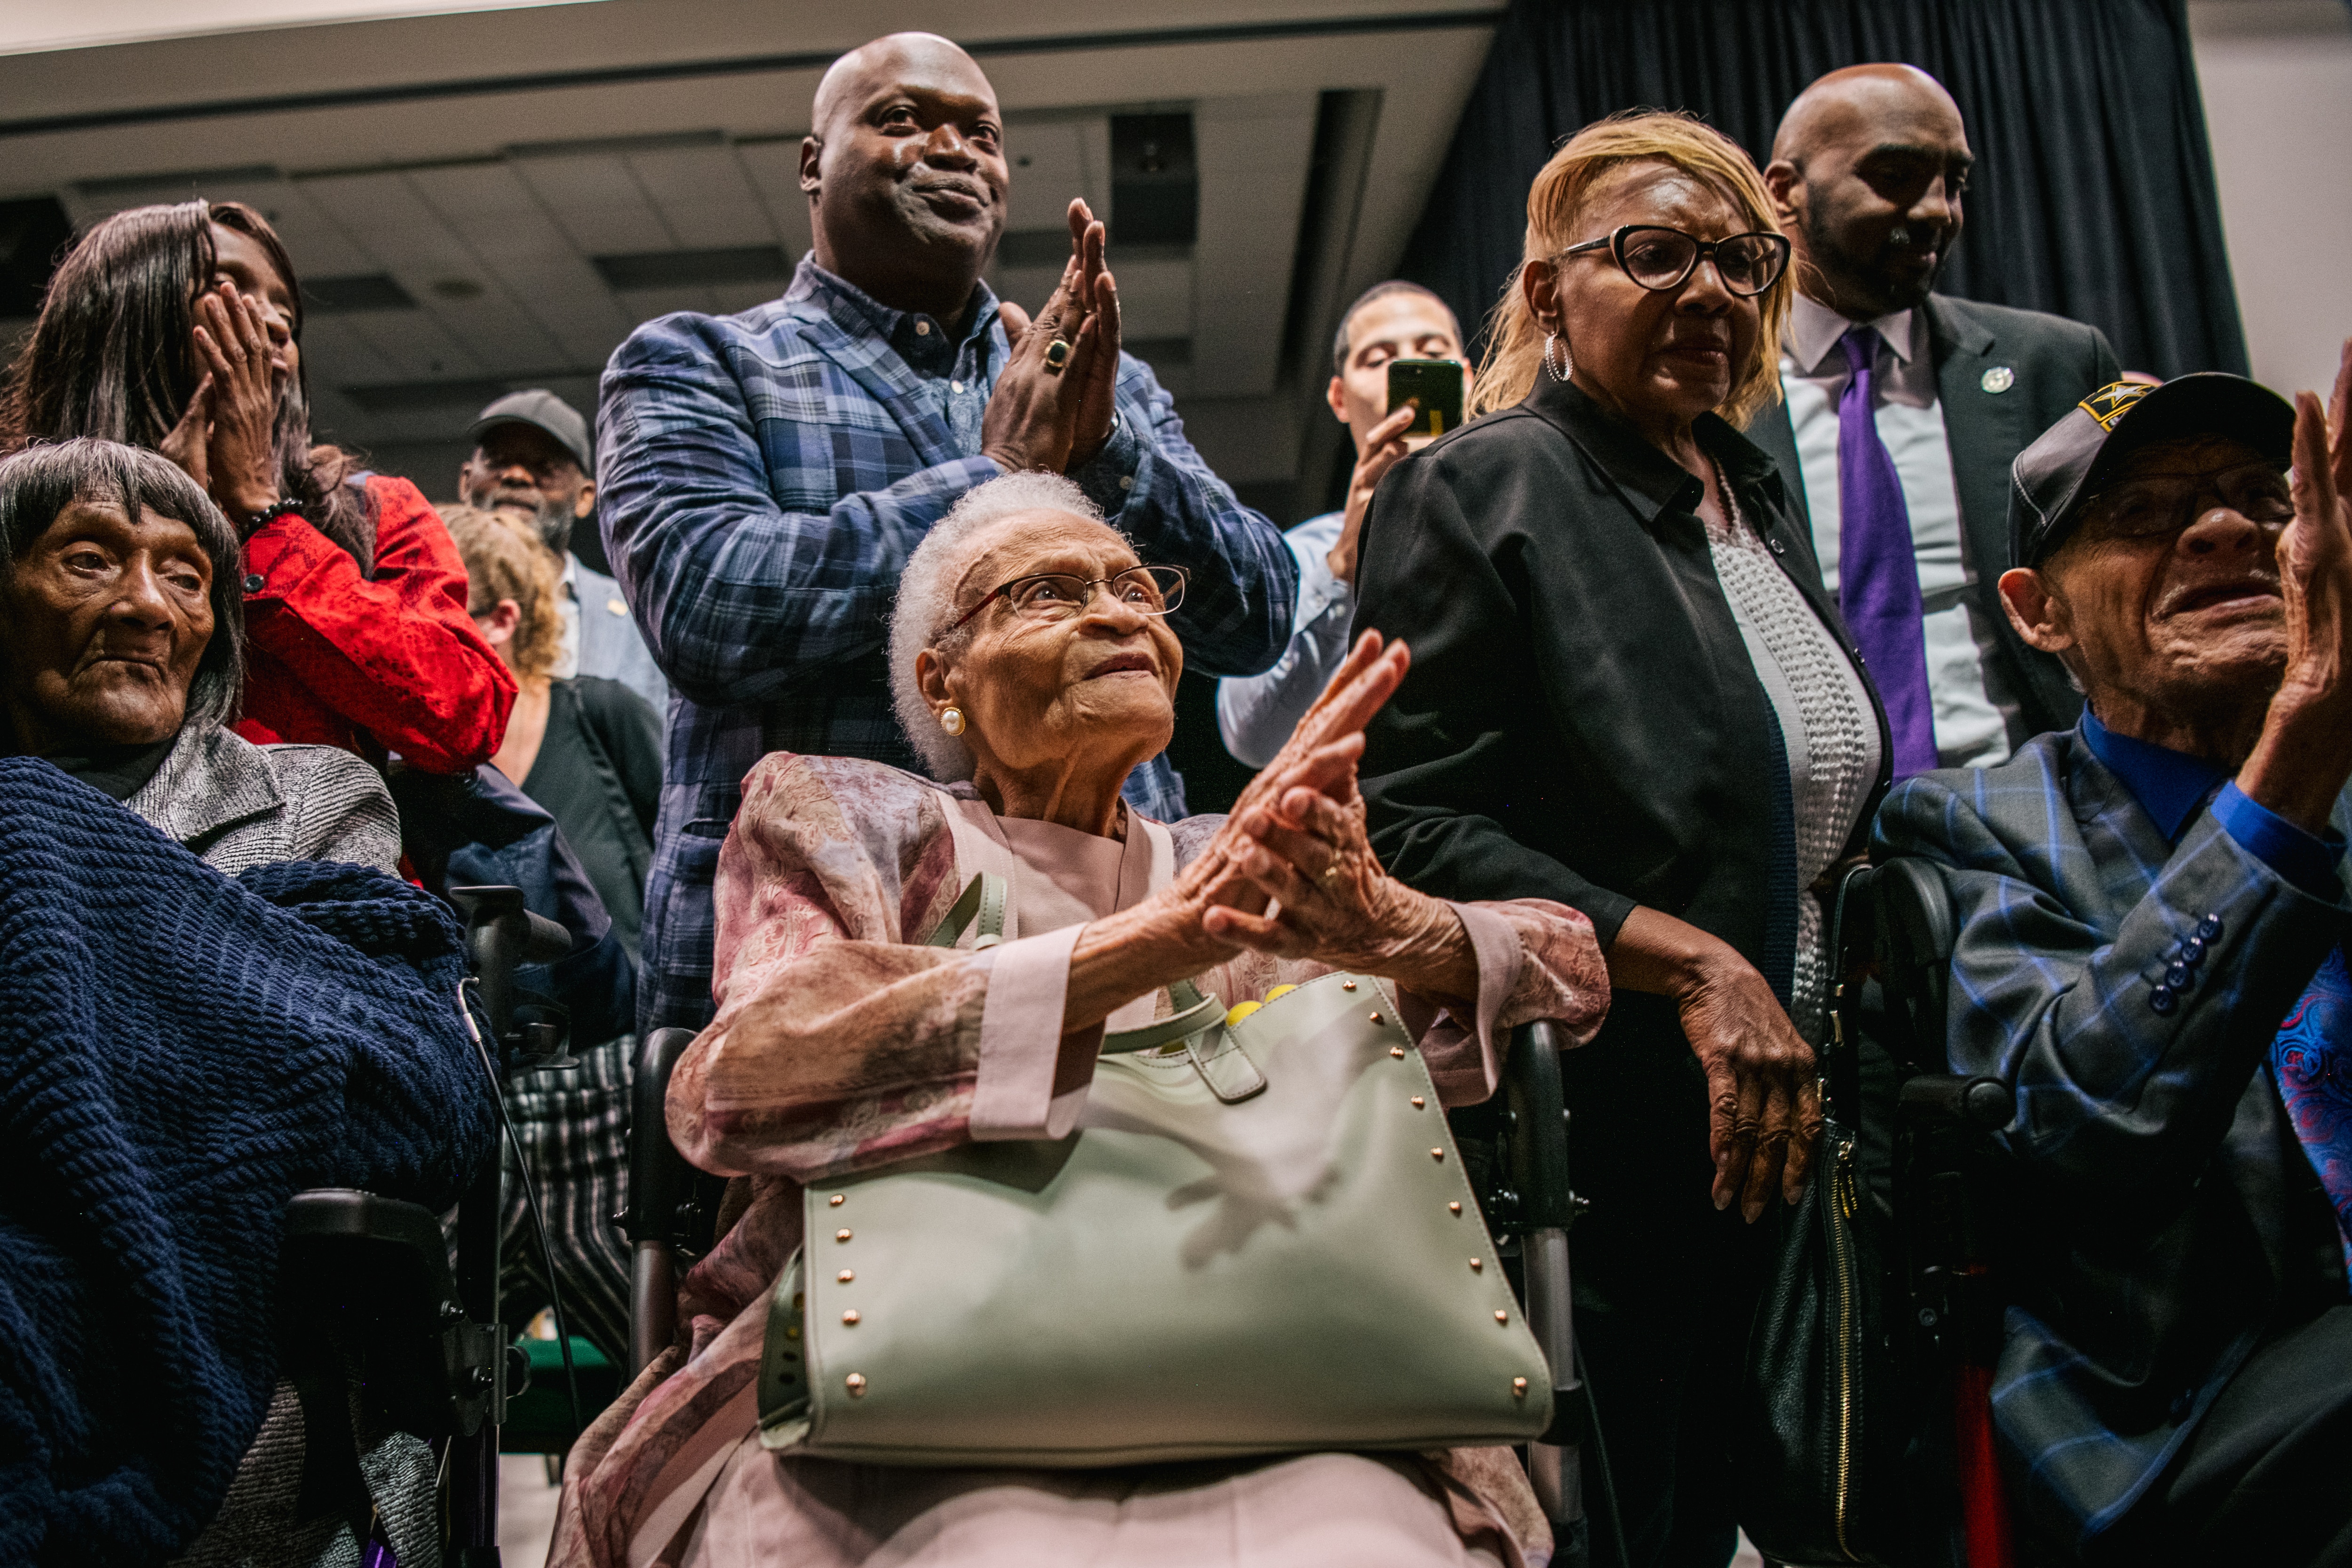 Survivors Lessie Benningfield Randle, Viola Fletcher, and Hughes Van Ellis sing together at commemorations of the 100th anniversary of the Tulsa Race Massacre.